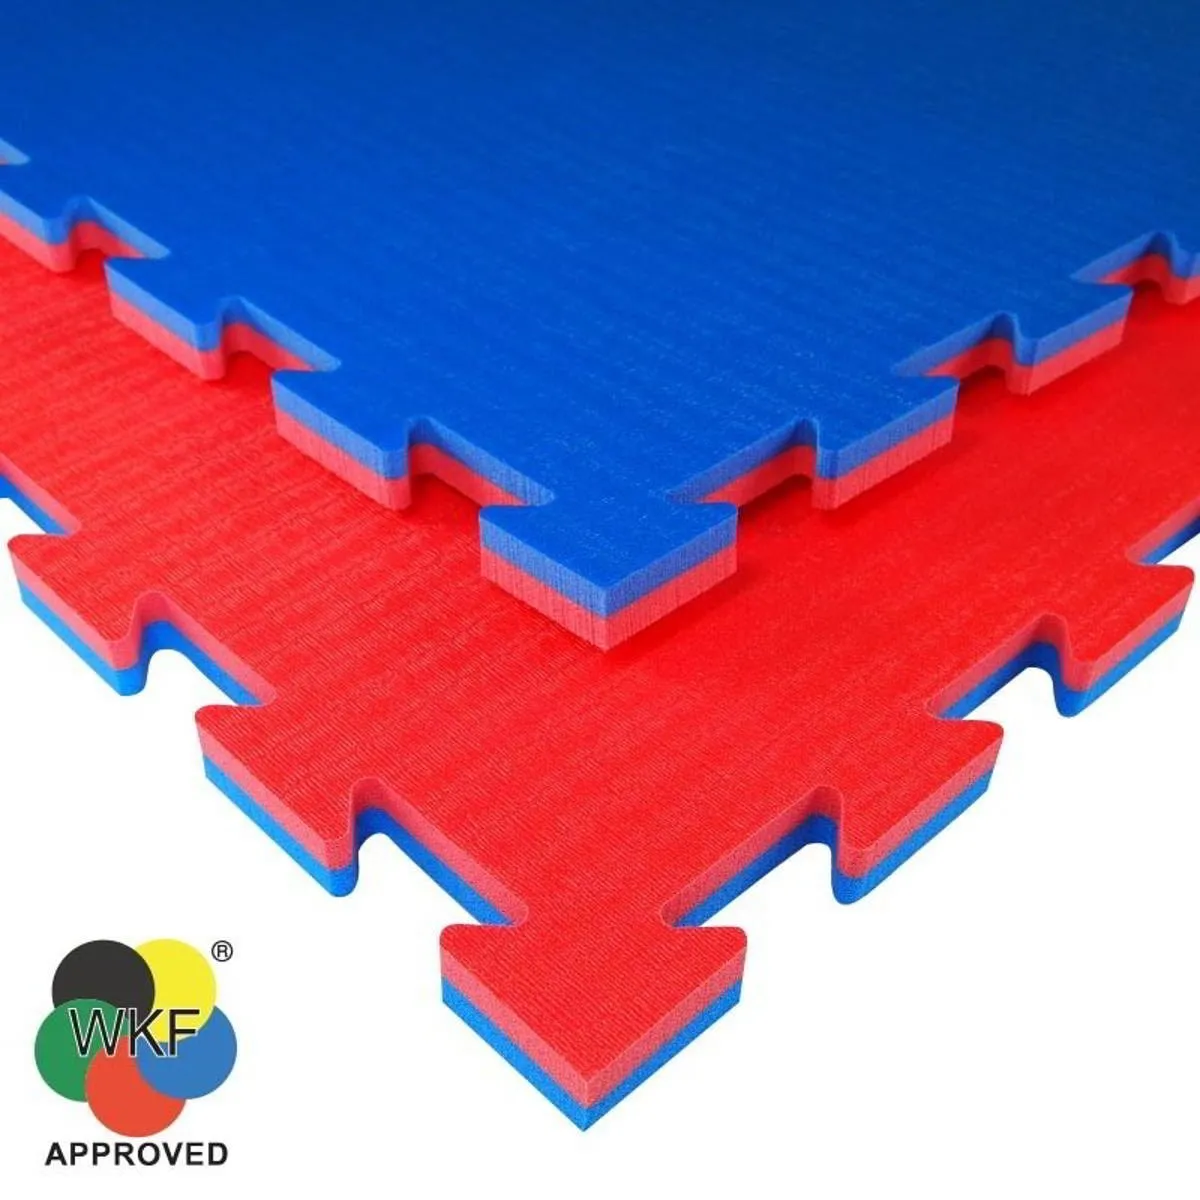 Karate puzzle mat WKF approved red/blue Tatamix 100x100 x 2cm